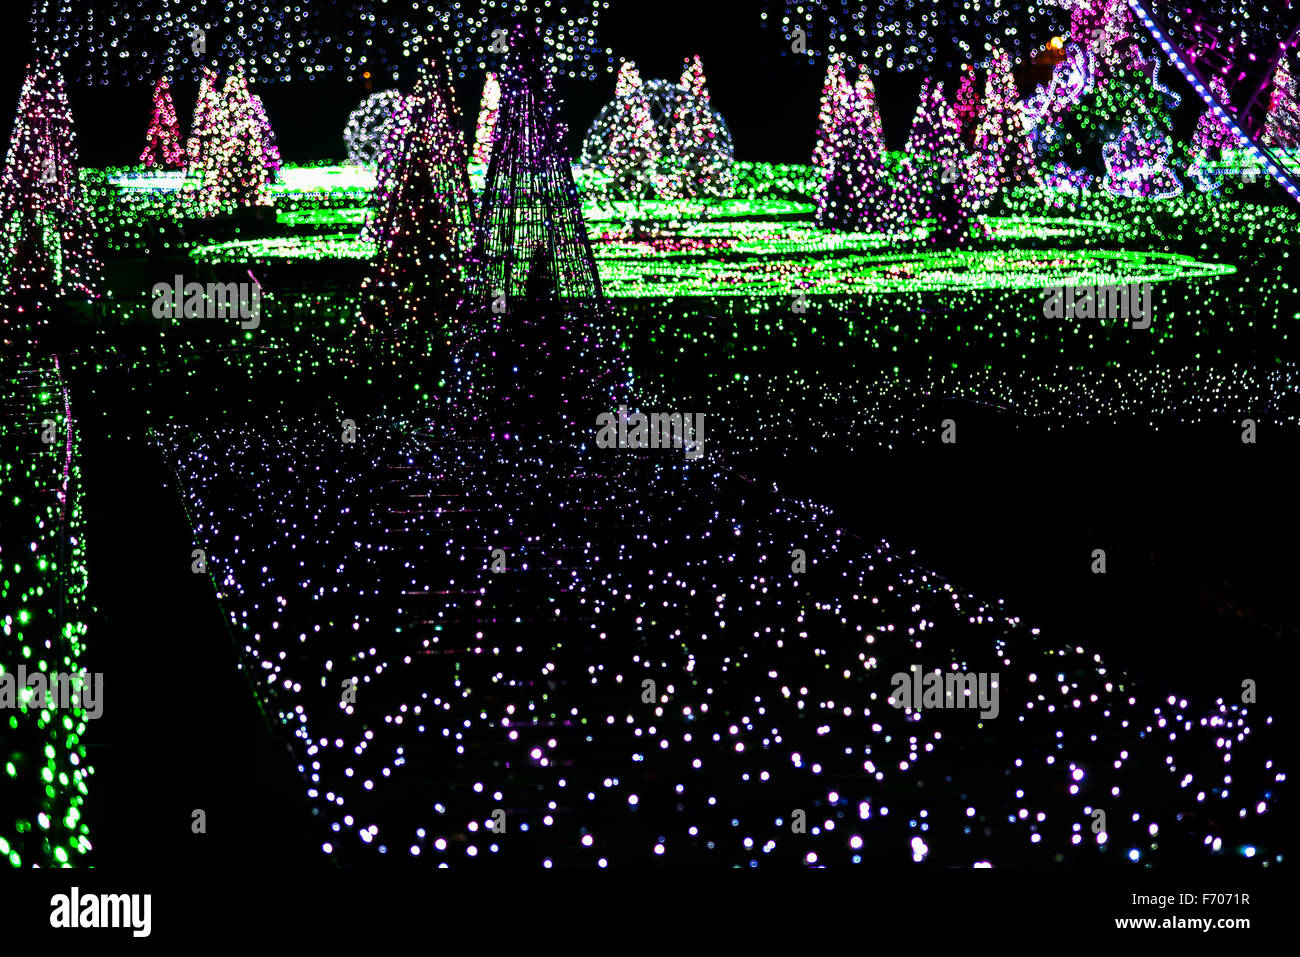 Garden of Colorful Lights with Sculptures of Christmas Trees Stock Photo